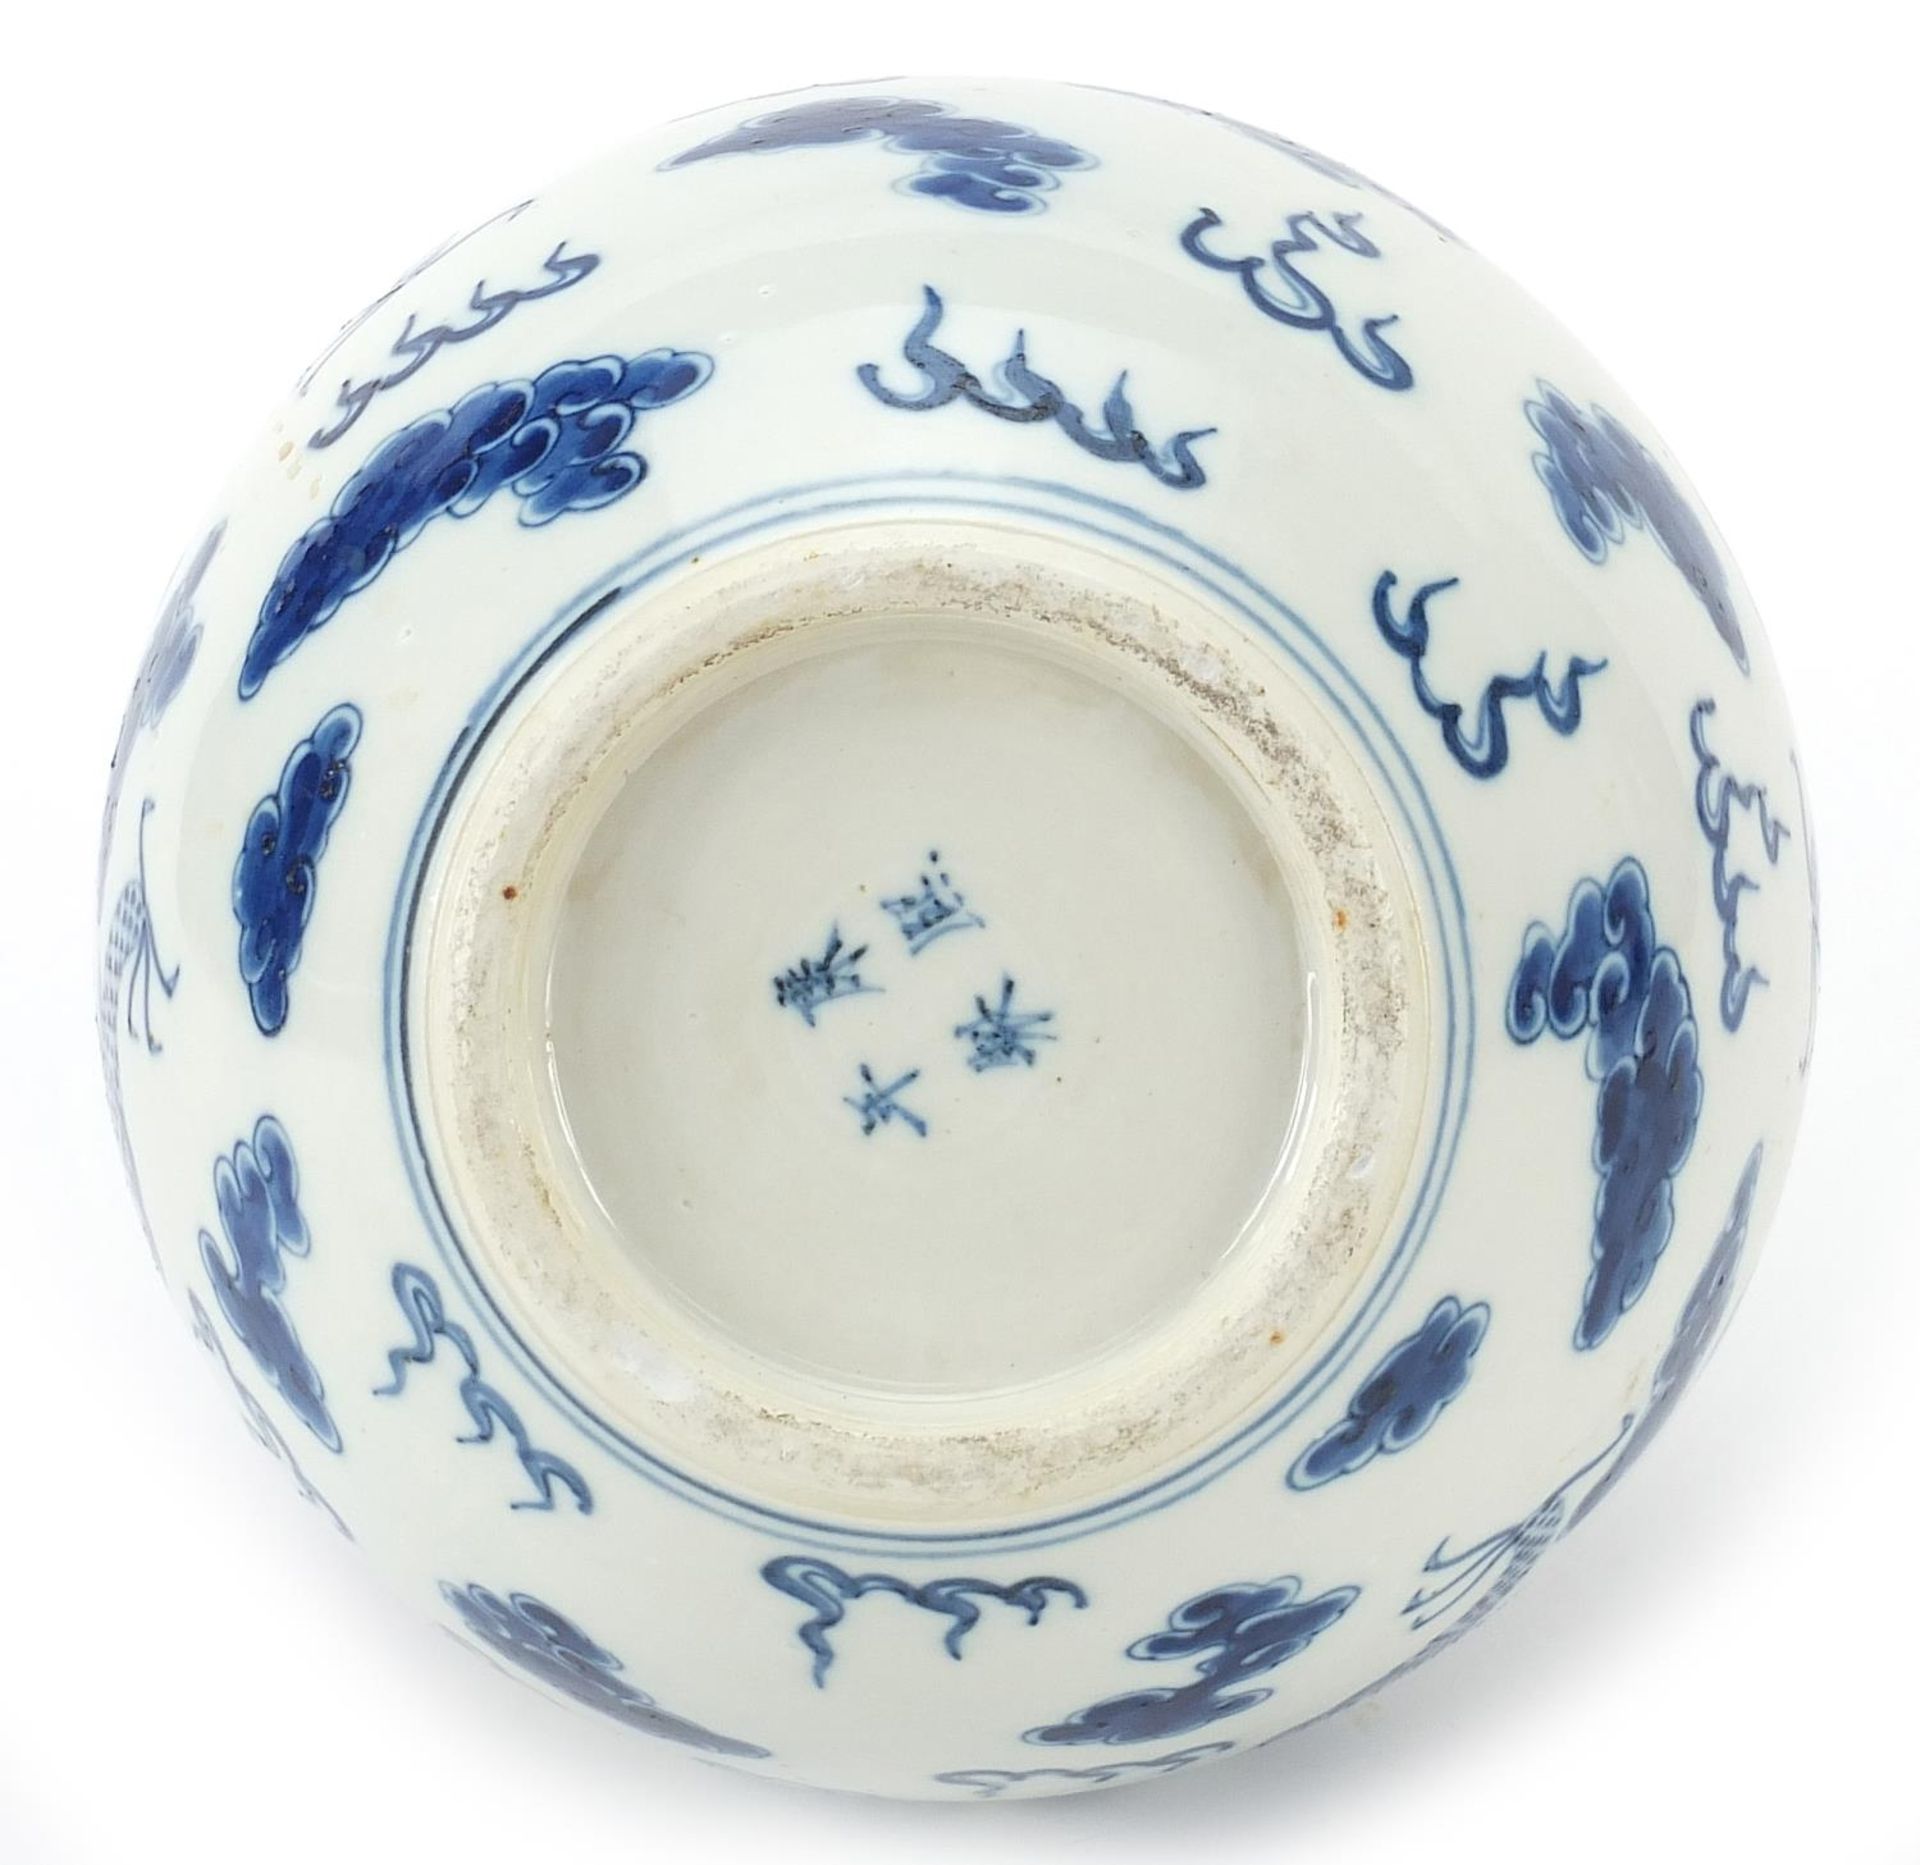 Chinese blue and white porcelain vase hand painted with dragons chasing a flaming pearl amongst - Image 3 of 3